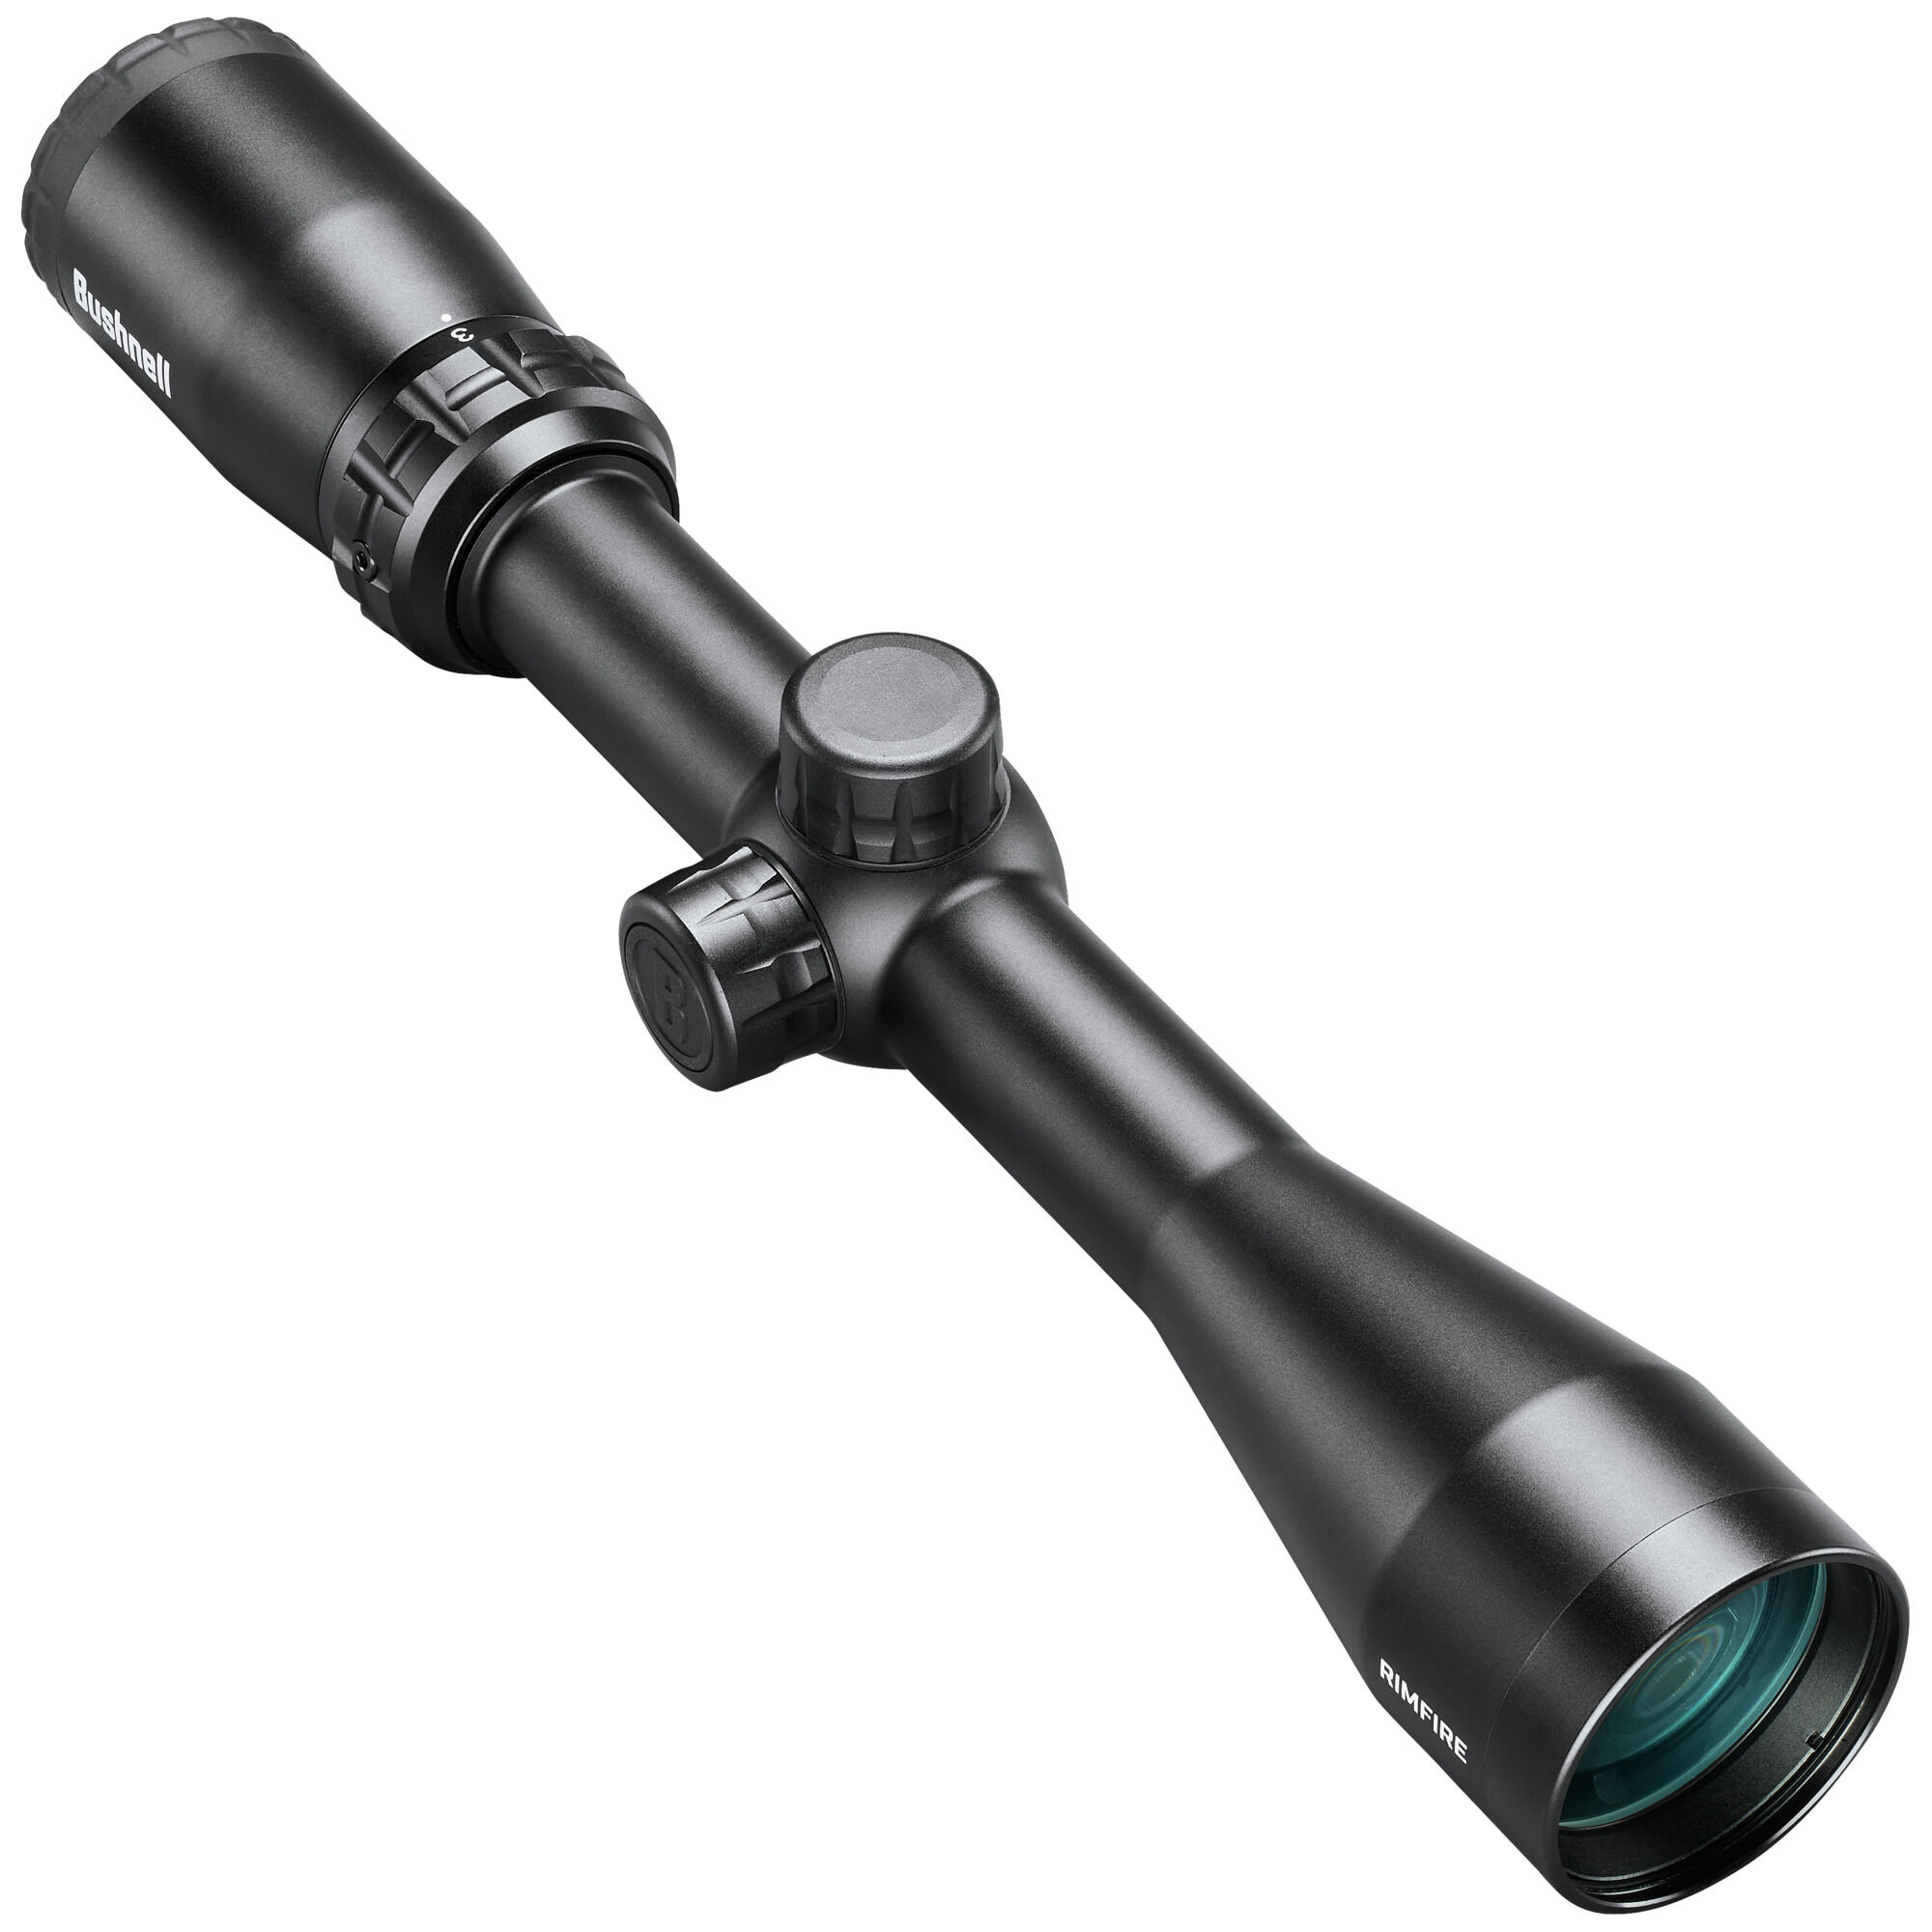 Buy New Riflescopes and More. Shop Today For All of Your Outdoor 